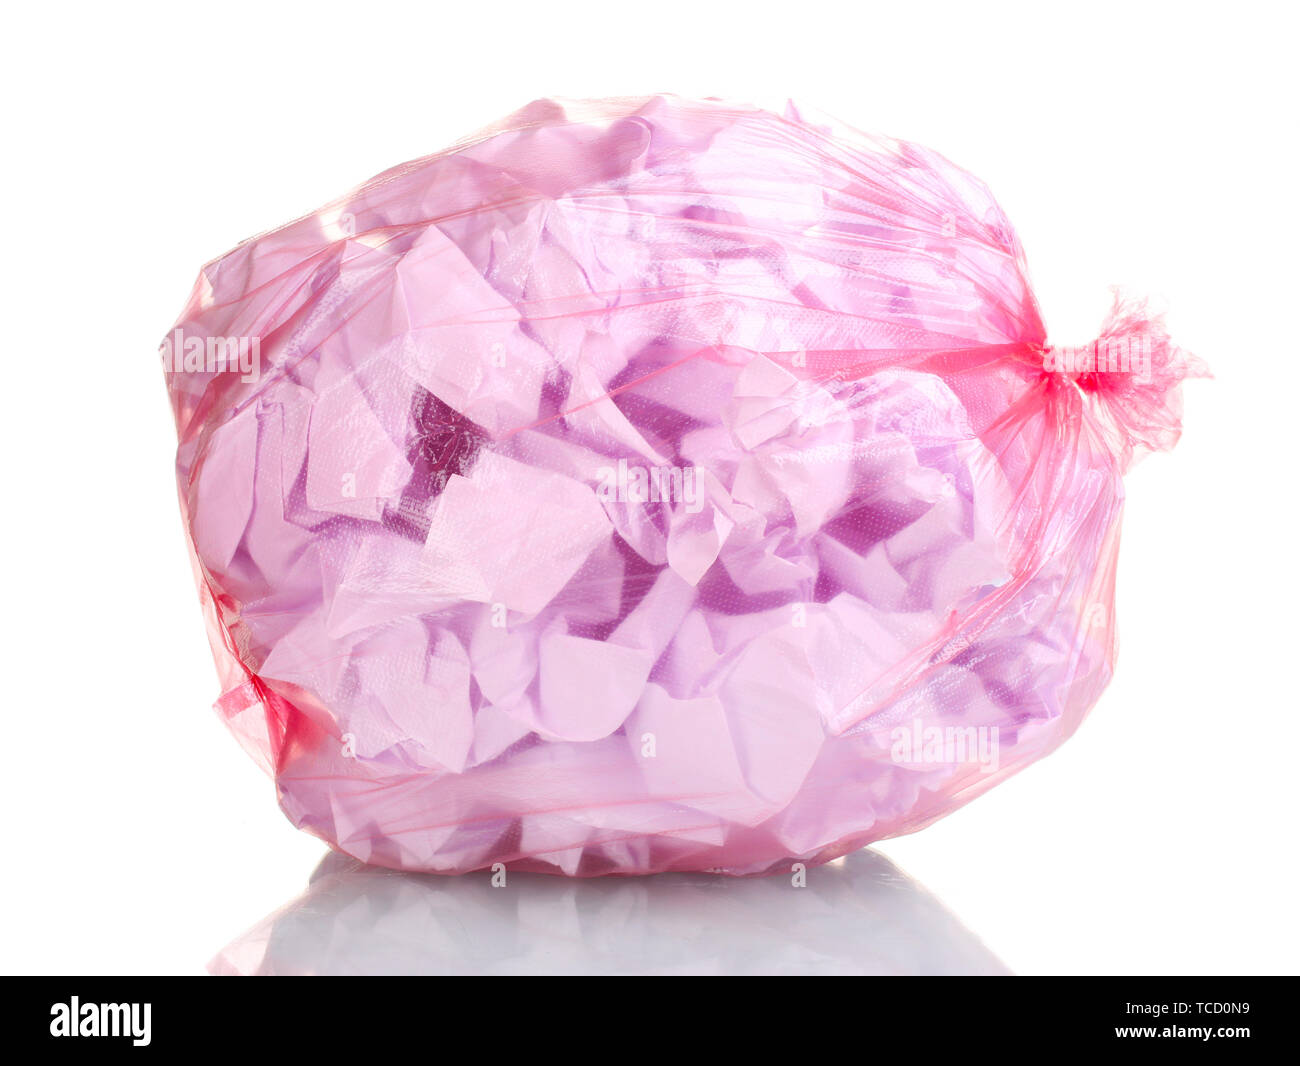 https://c8.alamy.com/comp/TCD0N9/red-garbage-bag-with-trash-isolated-on-white-TCD0N9.jpg